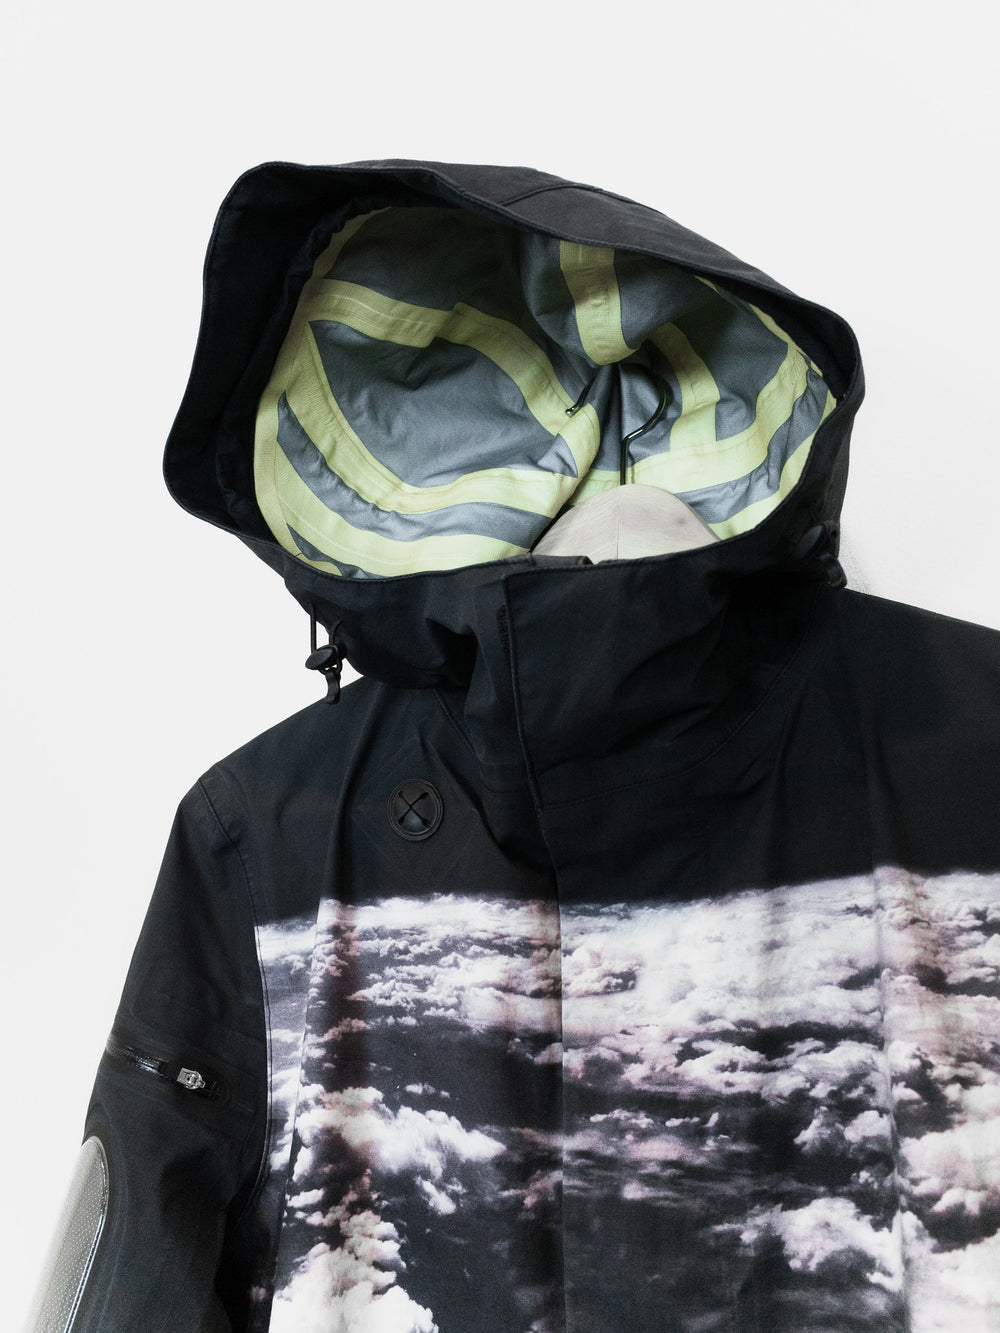 Undercover SS09 Clouds Gore-Tex Parka